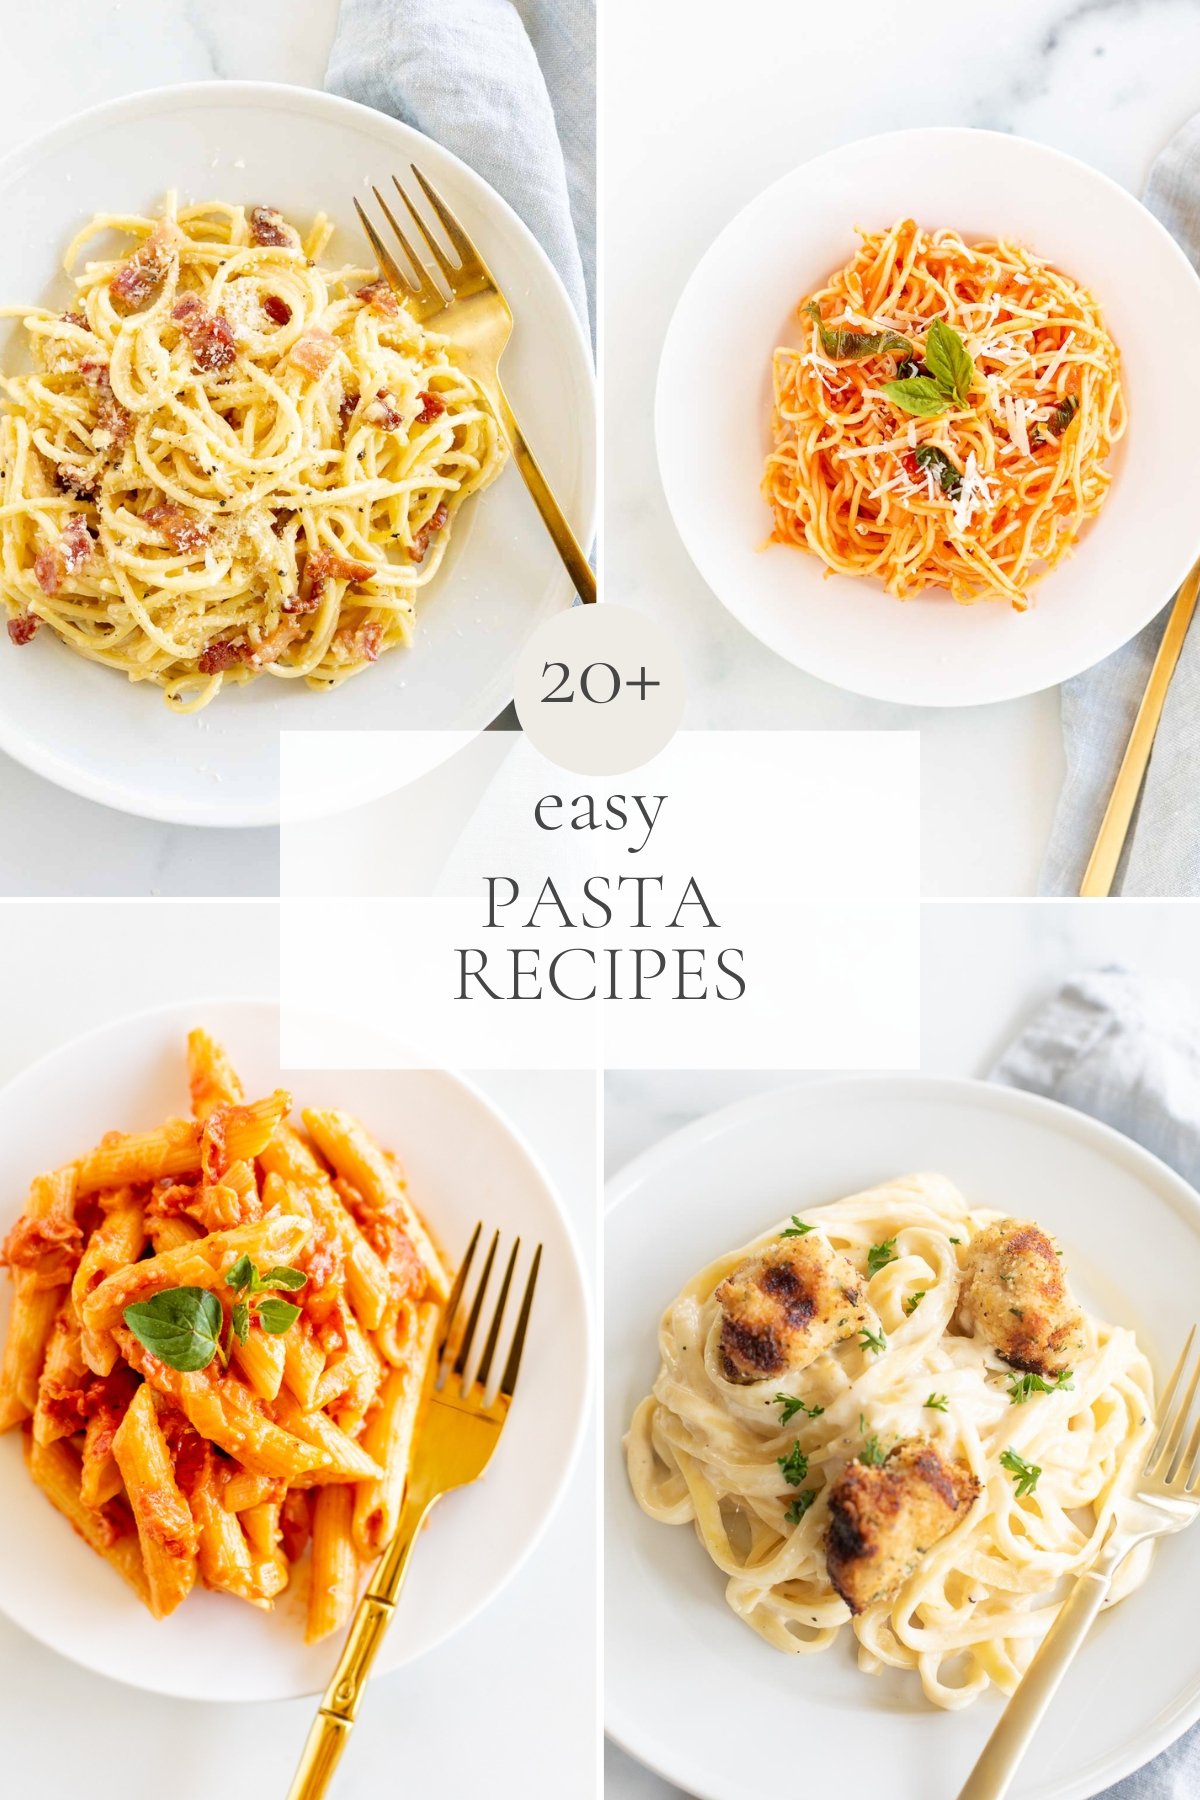 a graphic image featuring four different easy pasta recipes on white plates, headline reads "20+ easy pasta recipes" across the center. 